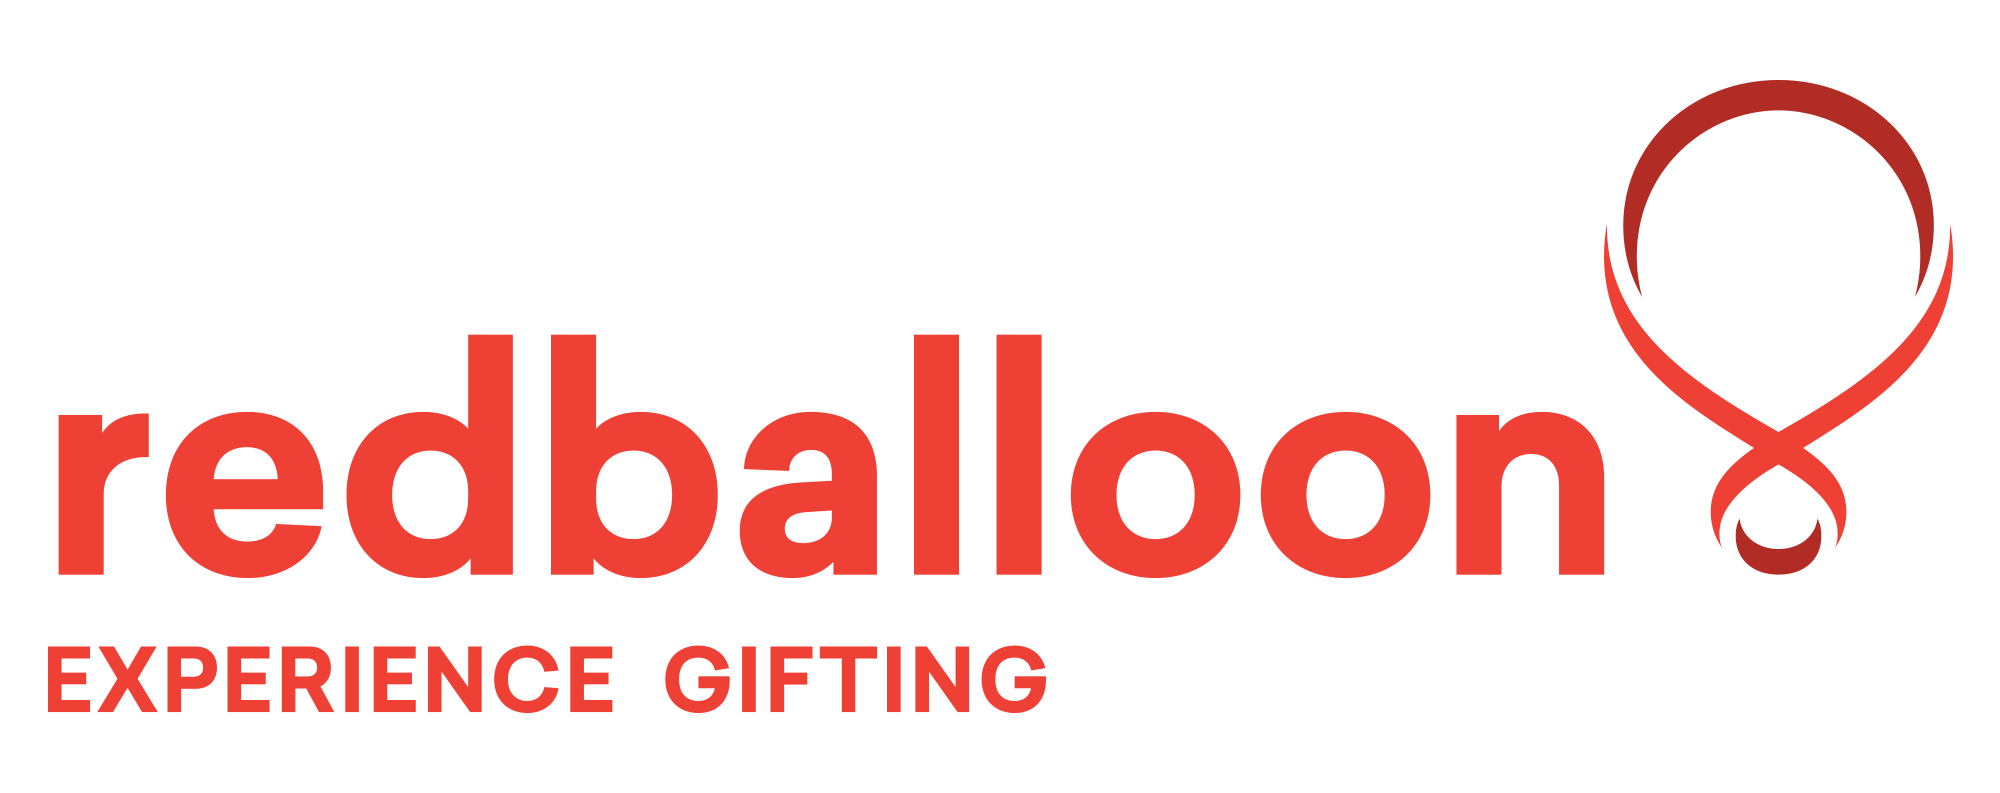 Red Balloon Logo - RedBalloon Logos And Images - Download The File Online